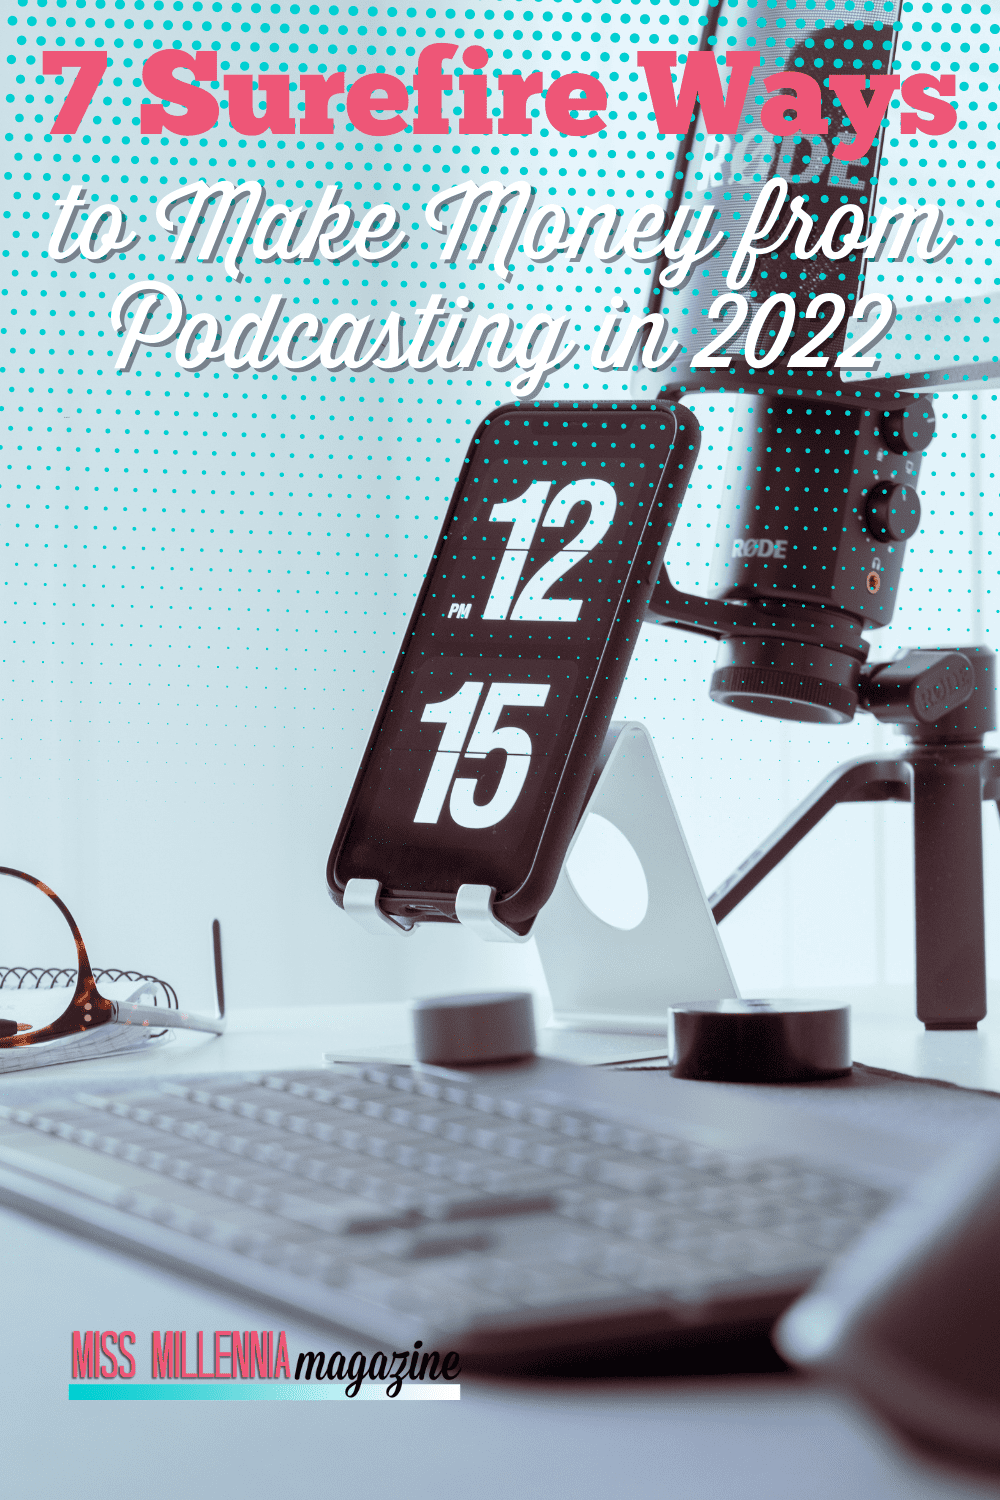 7 Surefire Ways to Make Money from Podcasting in 2022